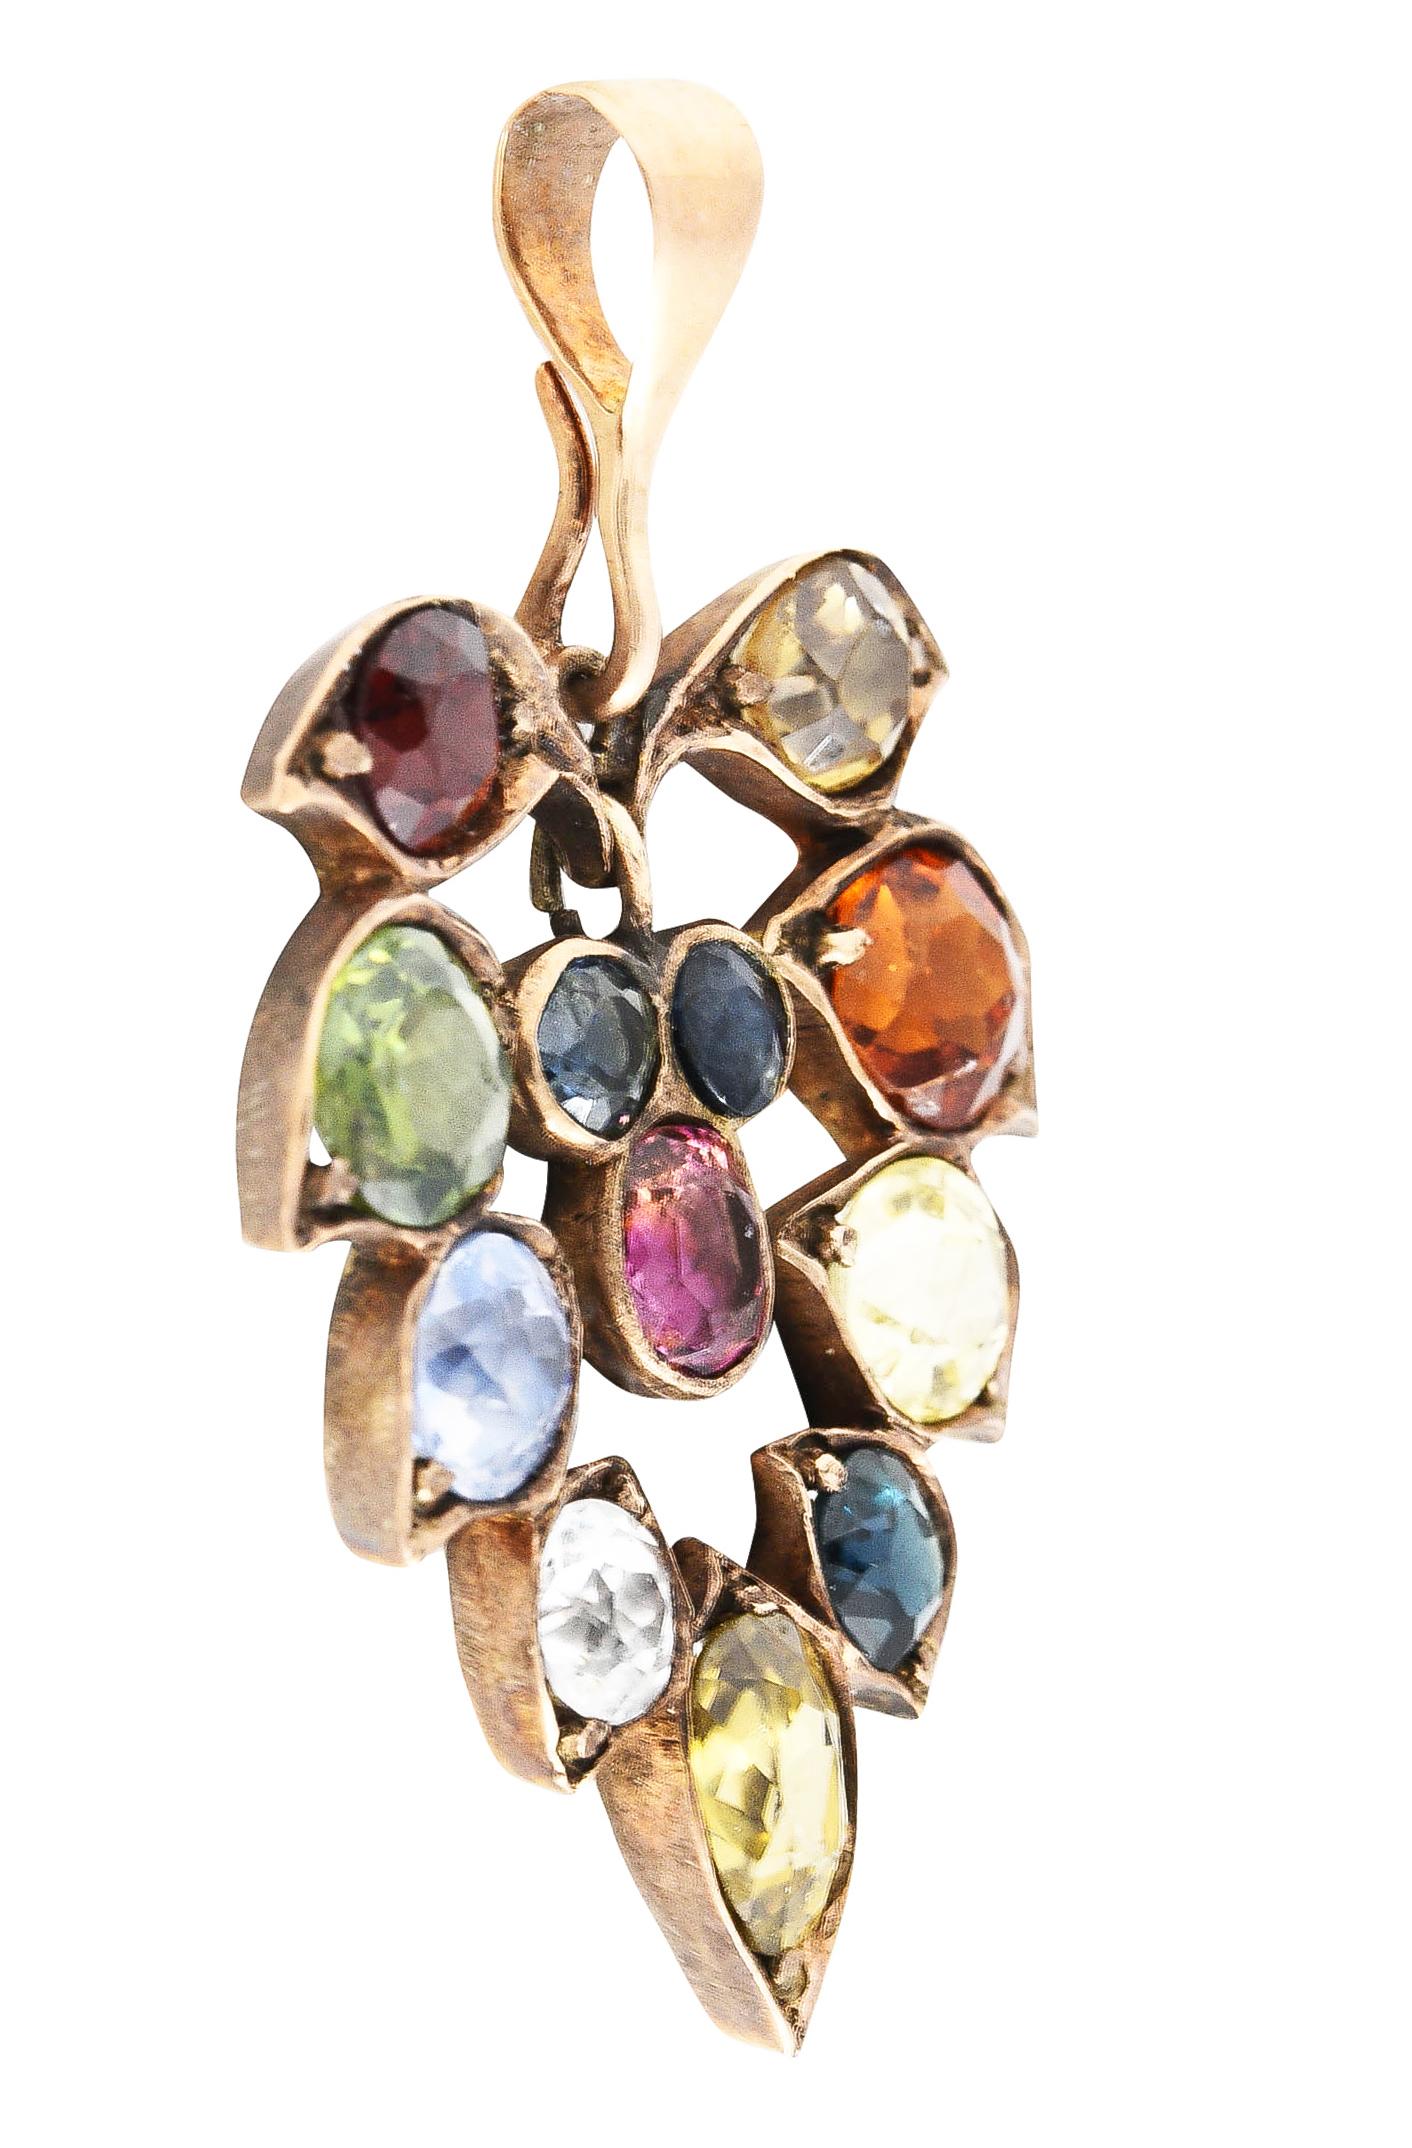 Pendant is designed as a flourishing leaf motif with an open center that suspends an articulated drop. Set throughout by a zircon, garnets, and fancy colored sapphires. Sapphires weigh collectively approximately 6.00 carats. Completed by a removable